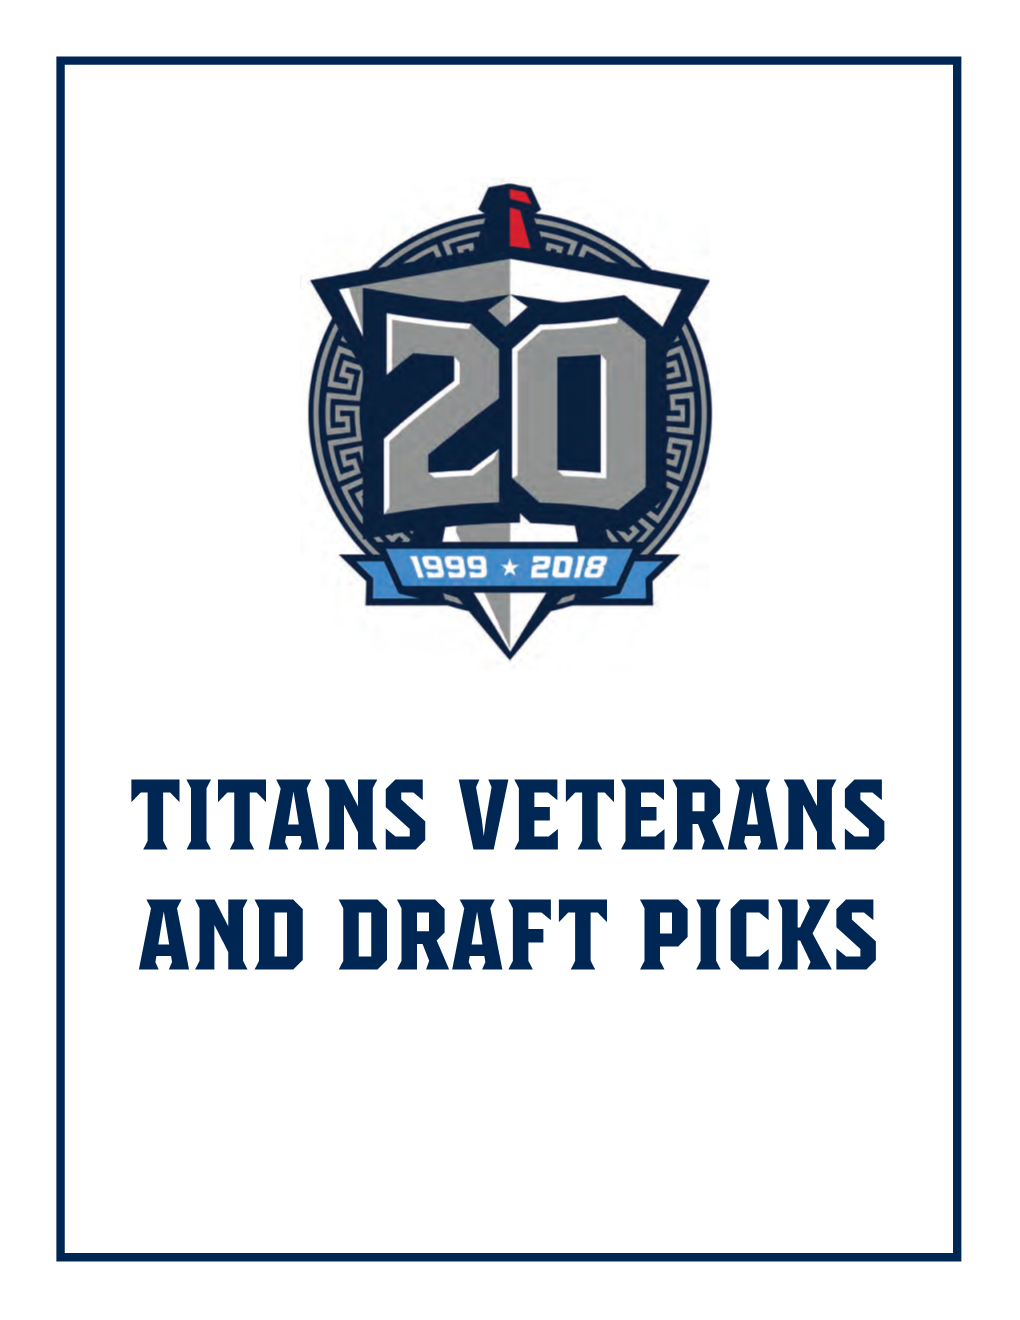 TITANS VETERANS and DRAFT PICKS Tennessee Titans 2018 Media Guide Veterans and Draft Picks